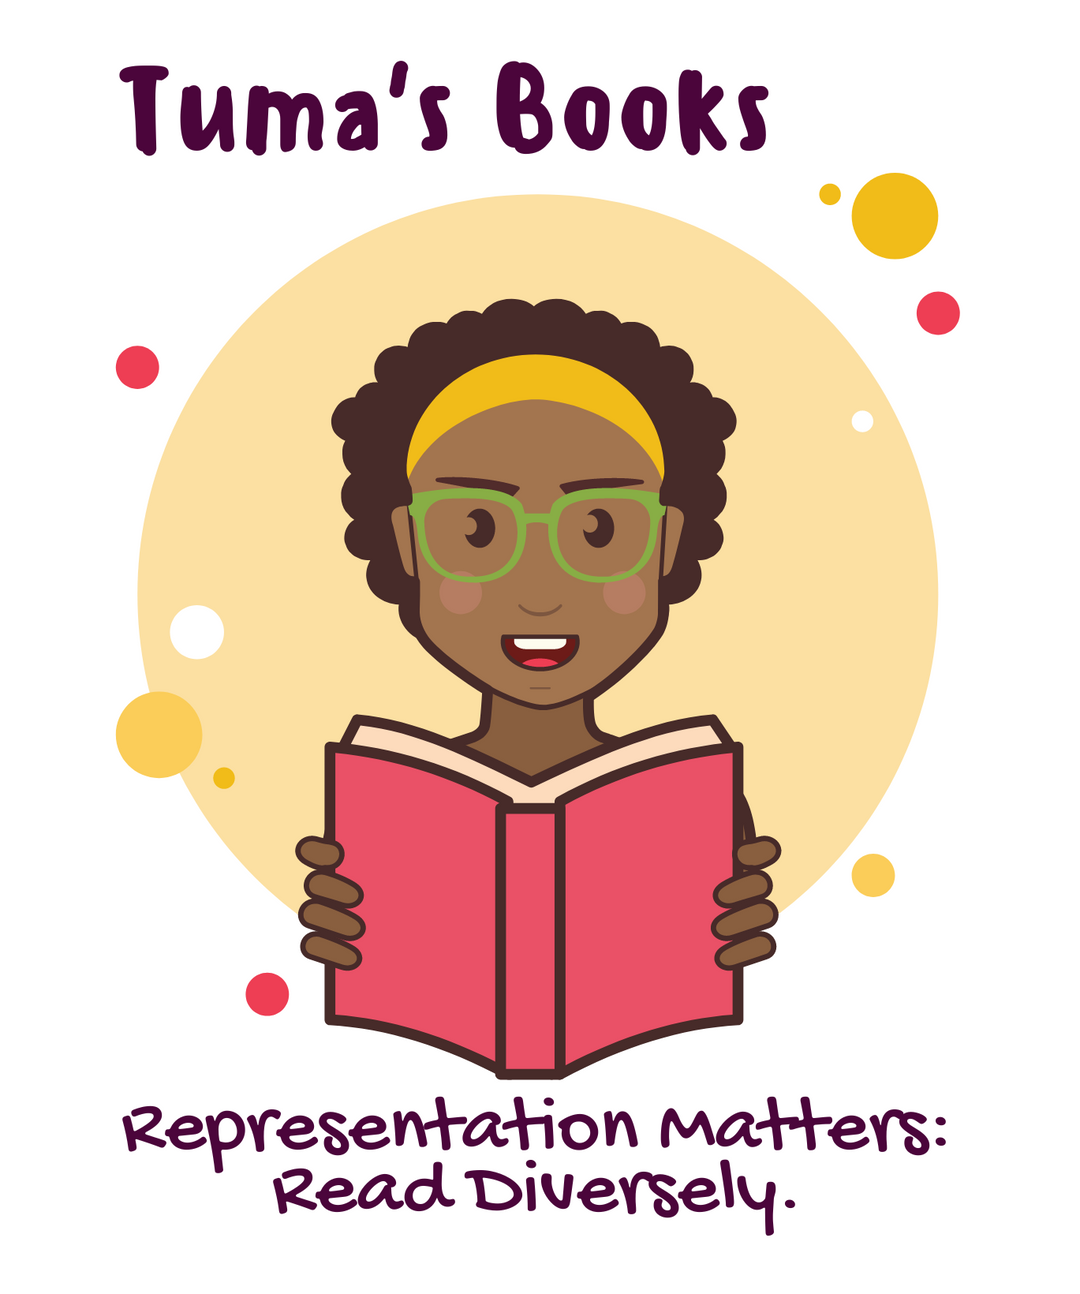 Tuma's Books - The Three Mothers: How the Mothers of Martin Luther King Jr., Malcolm X, and James Baldwin Shaped a Nation by Anna Malaika Tubbs (Nonfiction)